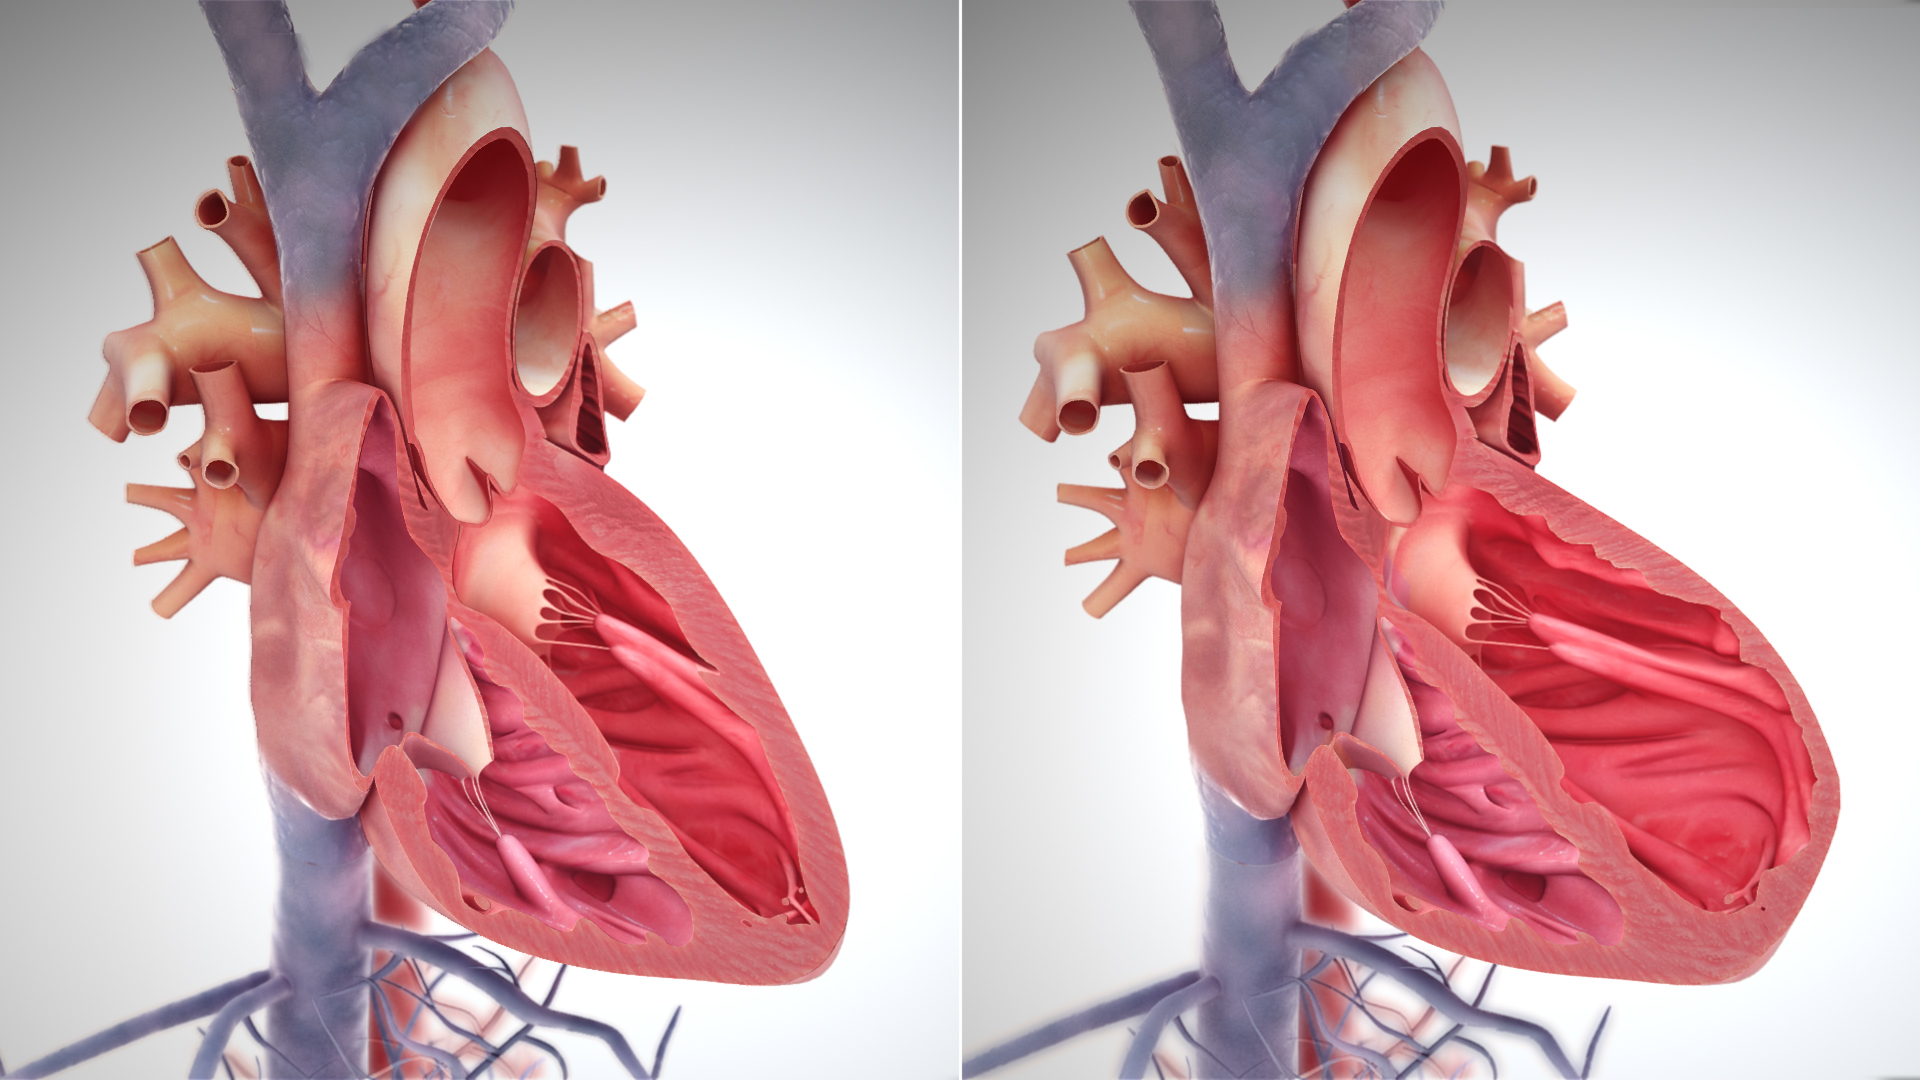 On the left, a diagram of a healthy heart, on the right, a diagram of a heart in heart failure. The walls of the heart are thin, making its circulation of blood too weak. Credit: Creative Commons by Scientificanimations.com (Attribution-Share Alike 4.0 International)